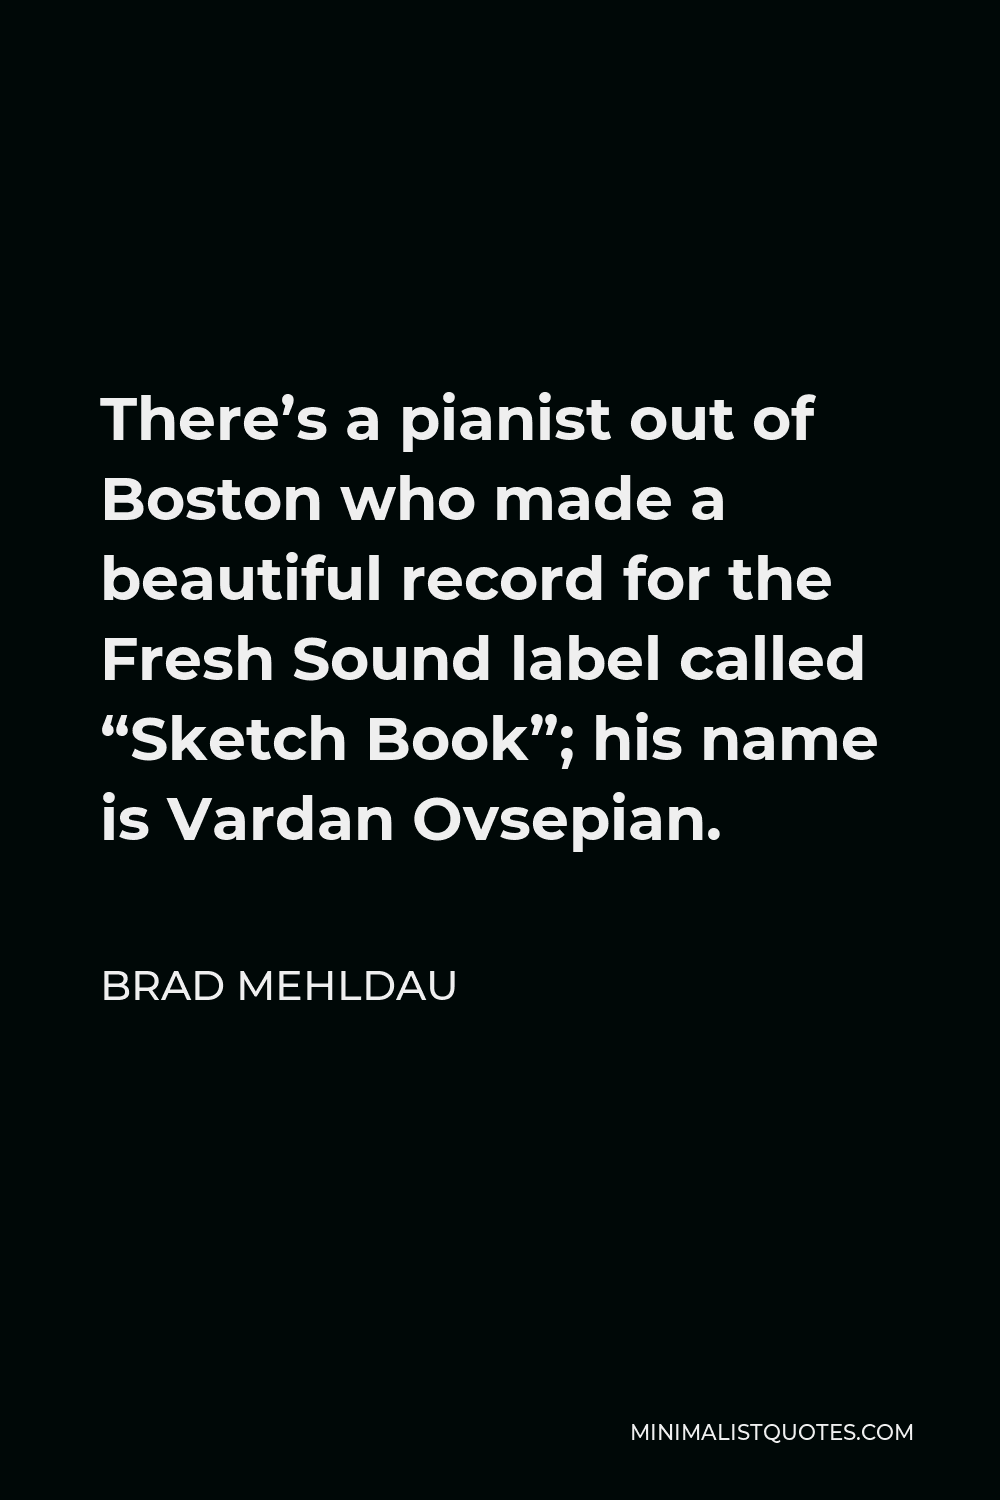 Brad Mehldau Quote - There’s a pianist out of Boston who made a beautiful record for the Fresh Sound label called “Sketch Book”; his name is Vardan Ovsepian.